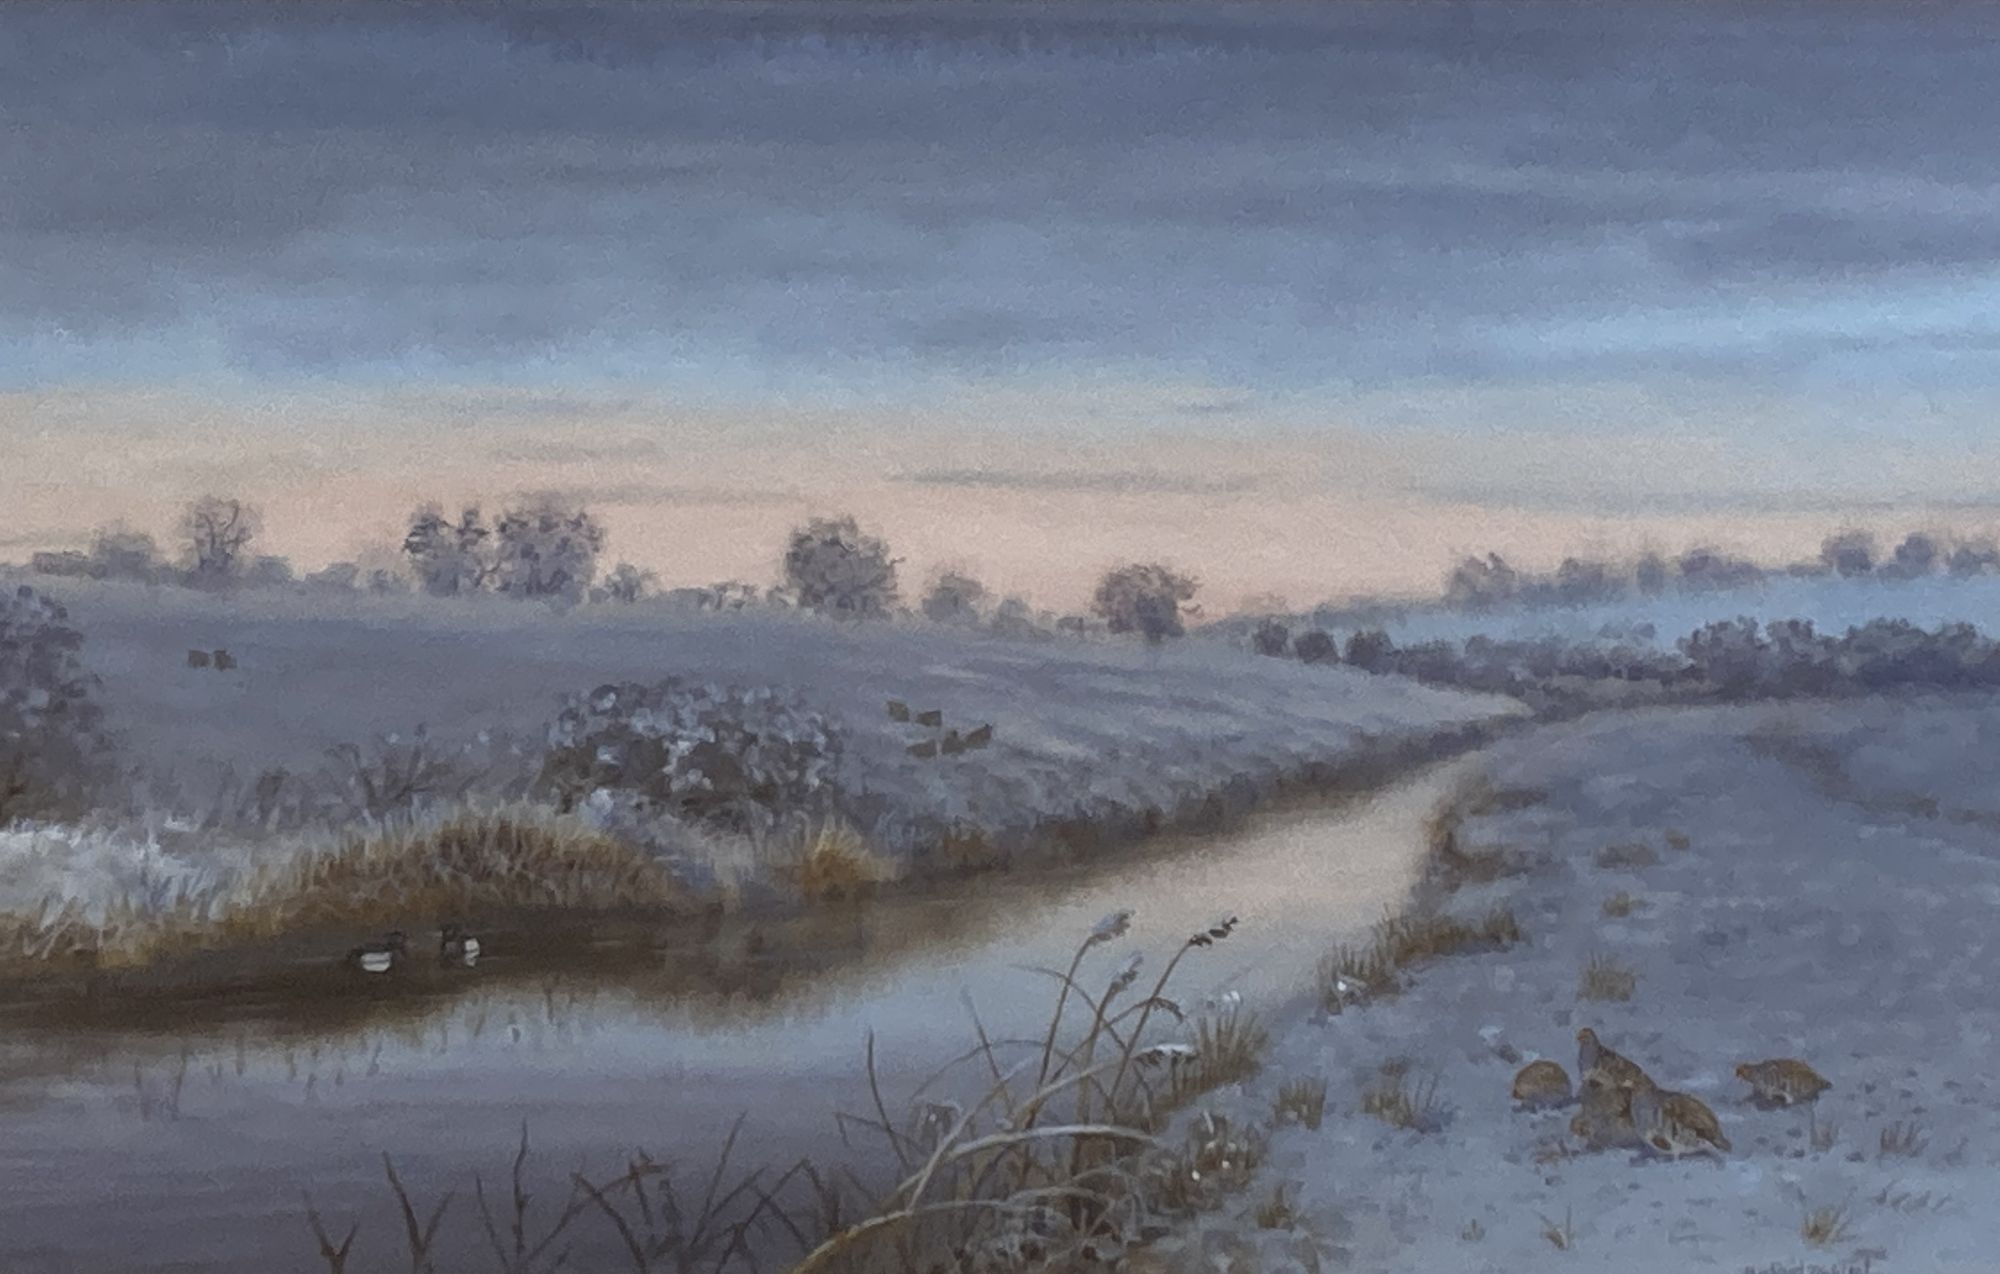 Richard Robjent (b. 1937), watercolour and gouache on paper, 'The River Glauen in Winter', signed, 22.5 x 33.5cm